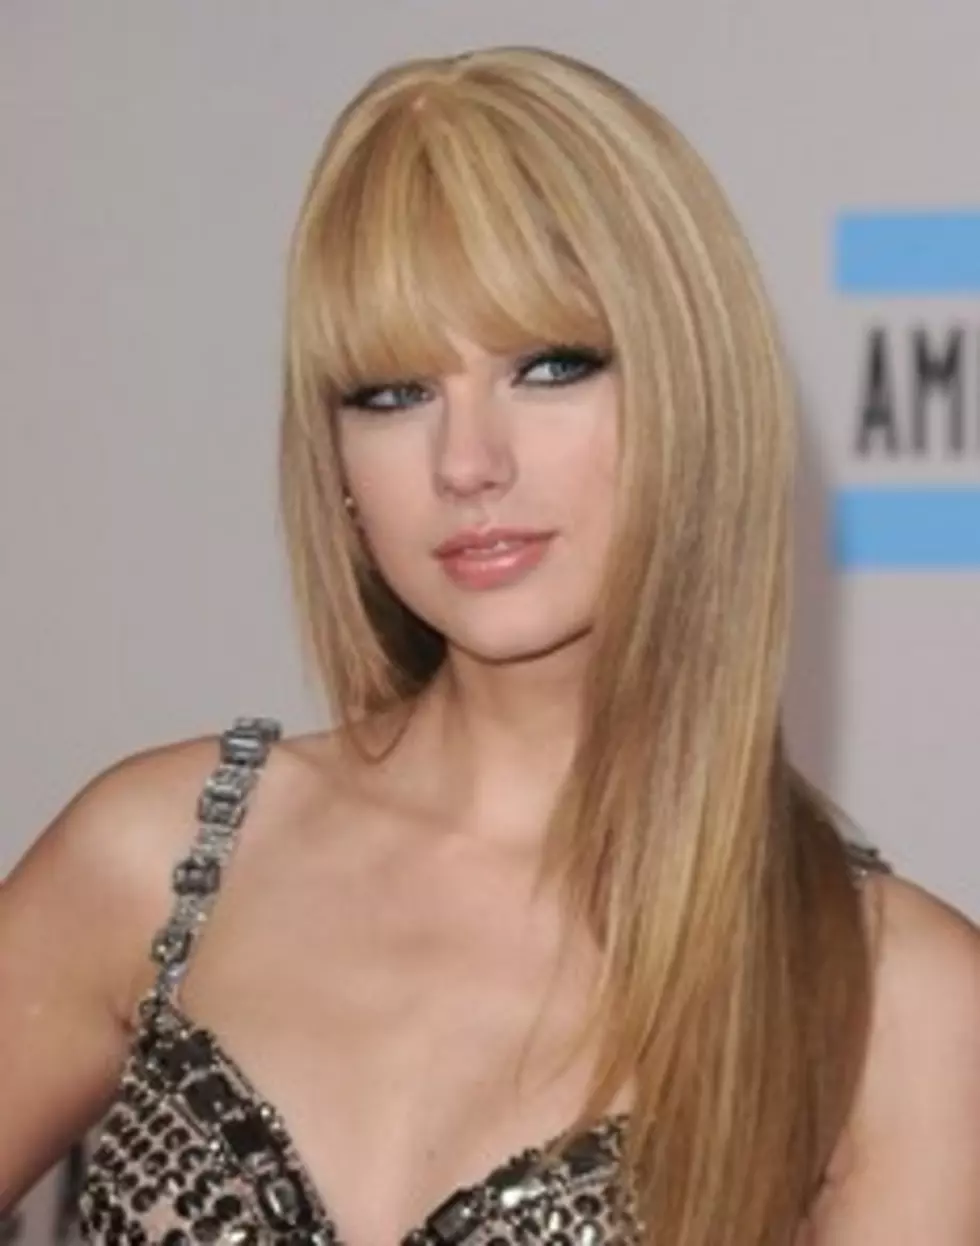 Taylor Swift’s New Hairstyle!